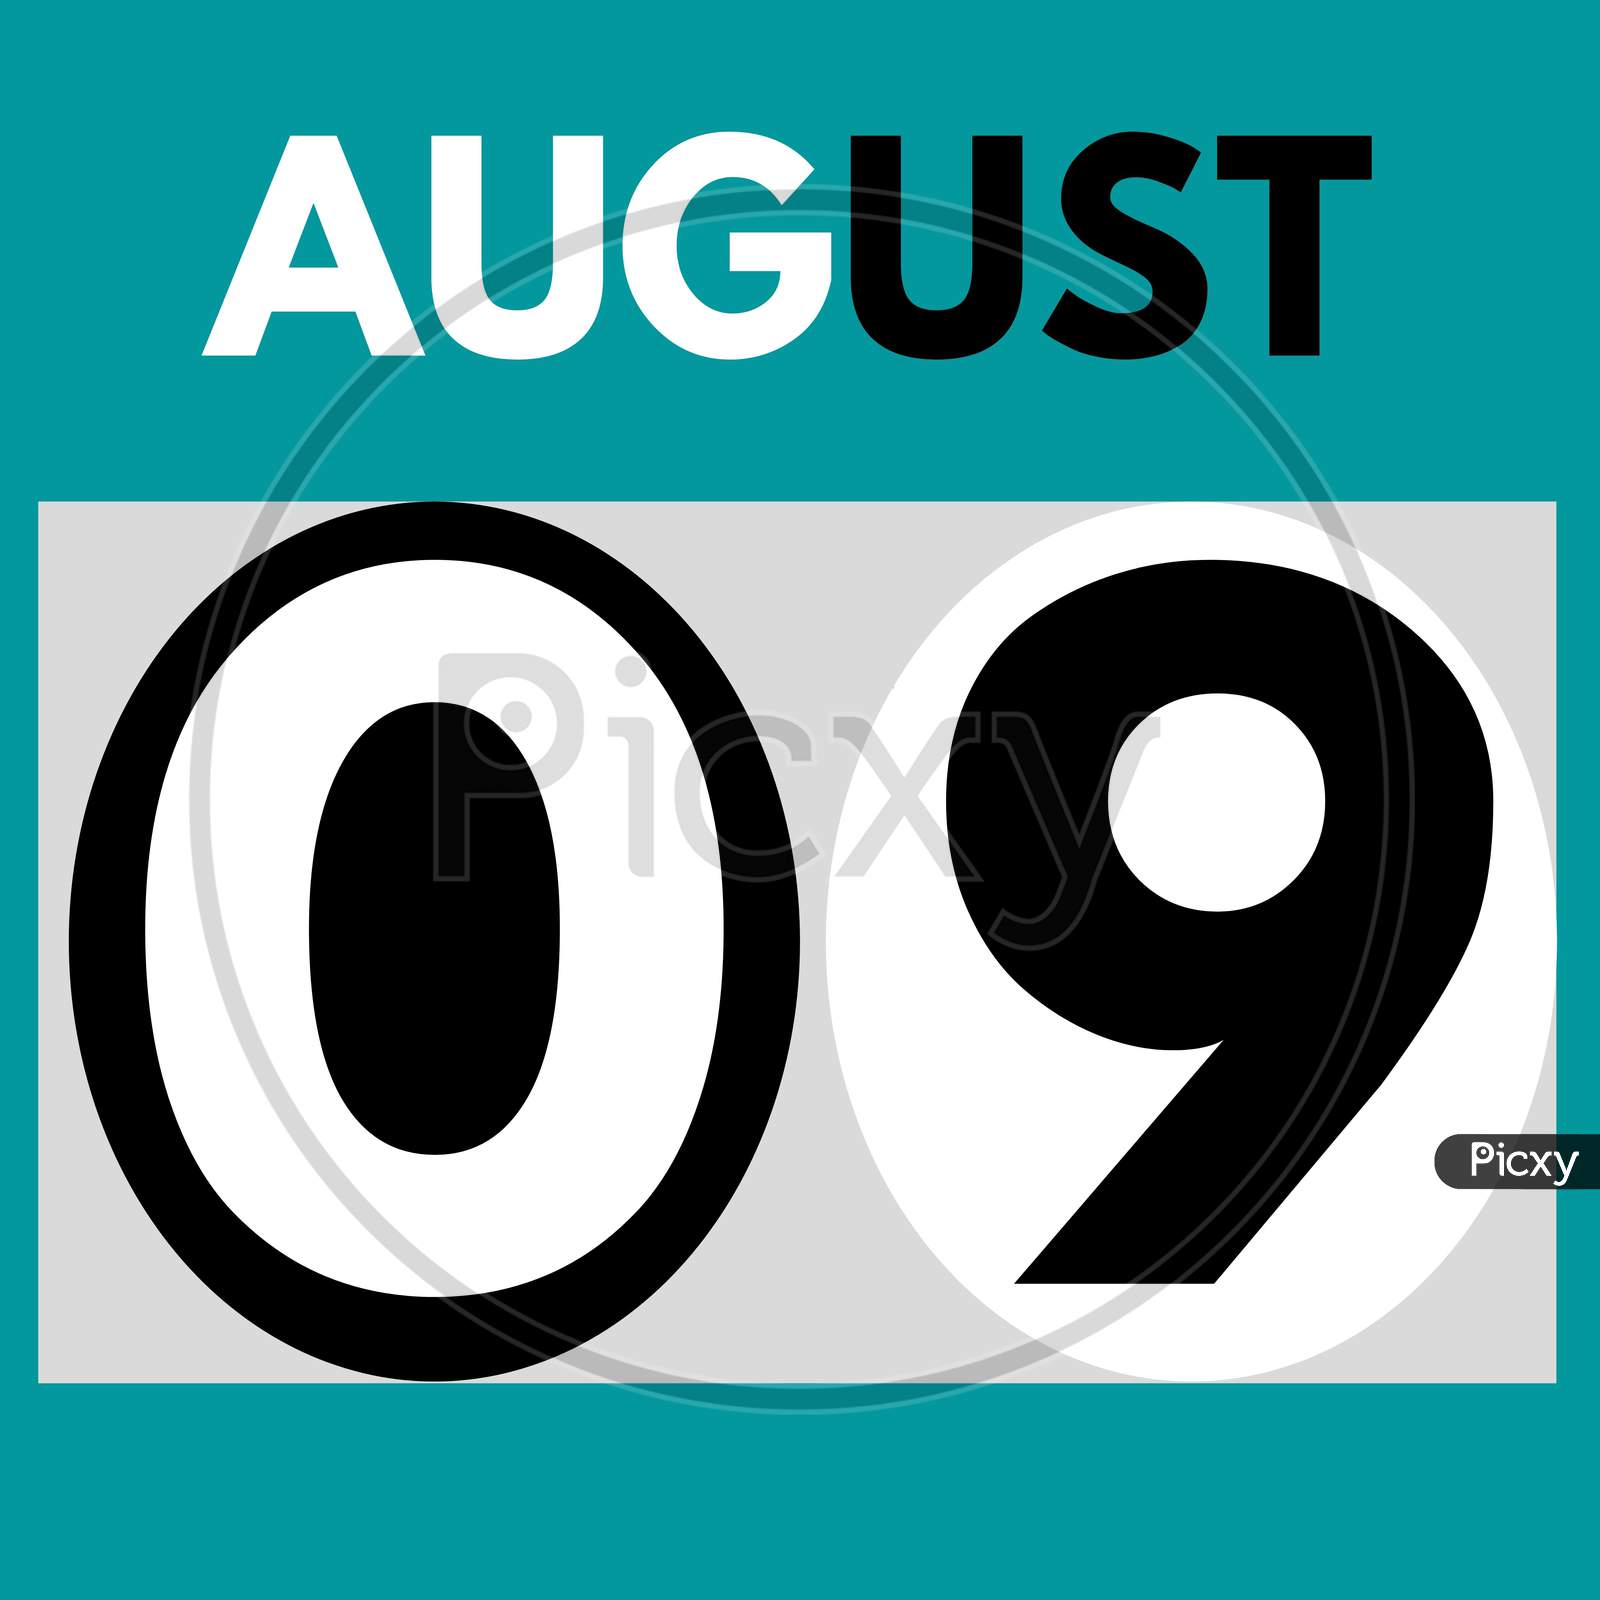 Image Of August 9 Modern Daily Calendar Icon Date Day Month Calendar For The Month Of August Dw Picxy